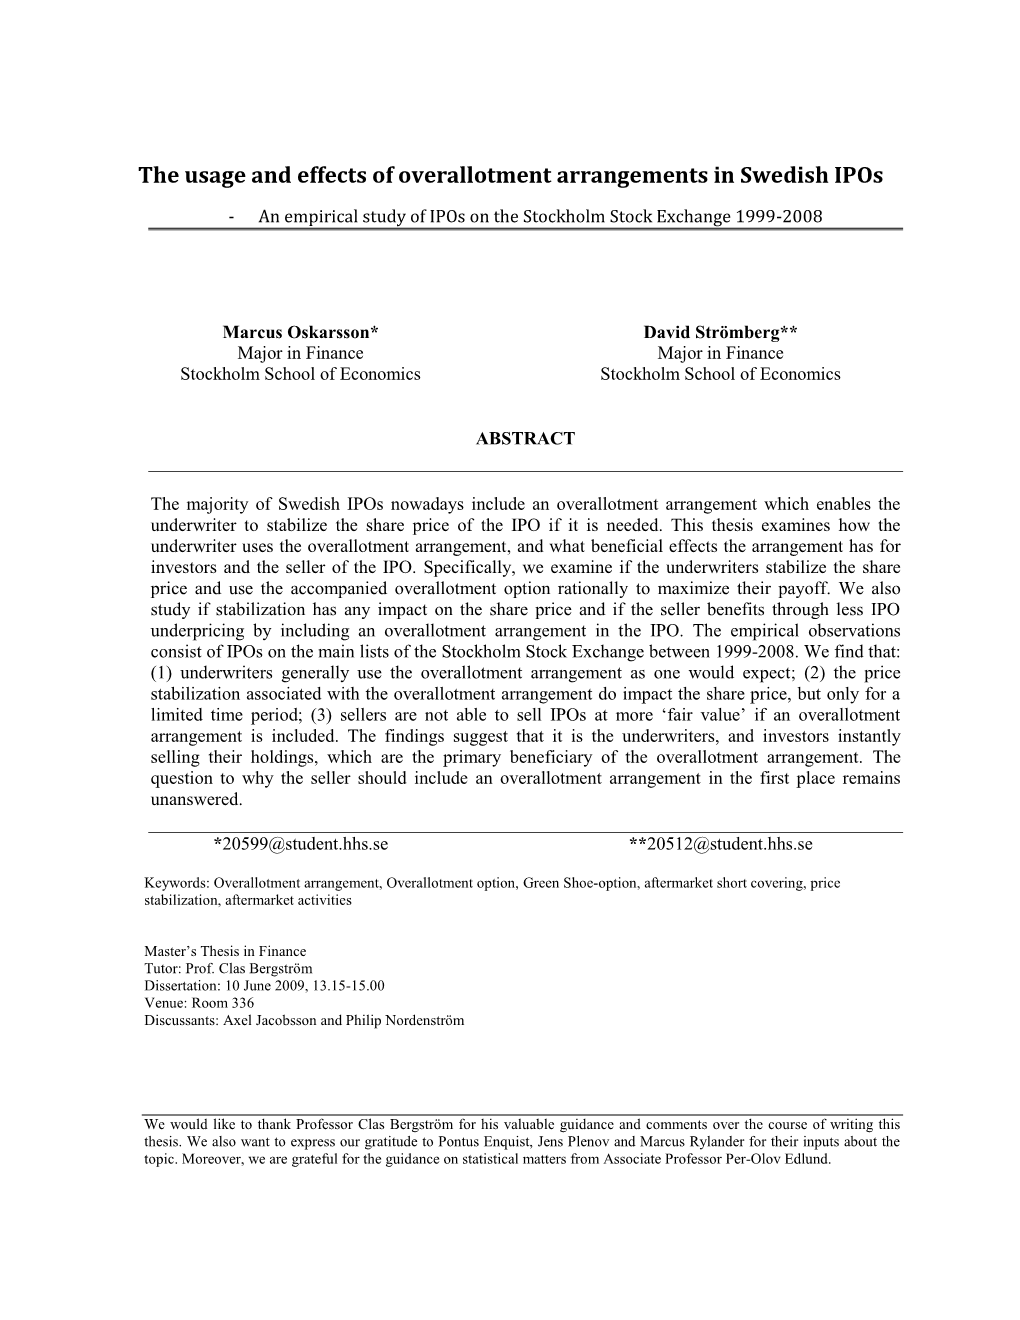 The Usage and Effects of Overallotment Arrangements in Swedish Ipos